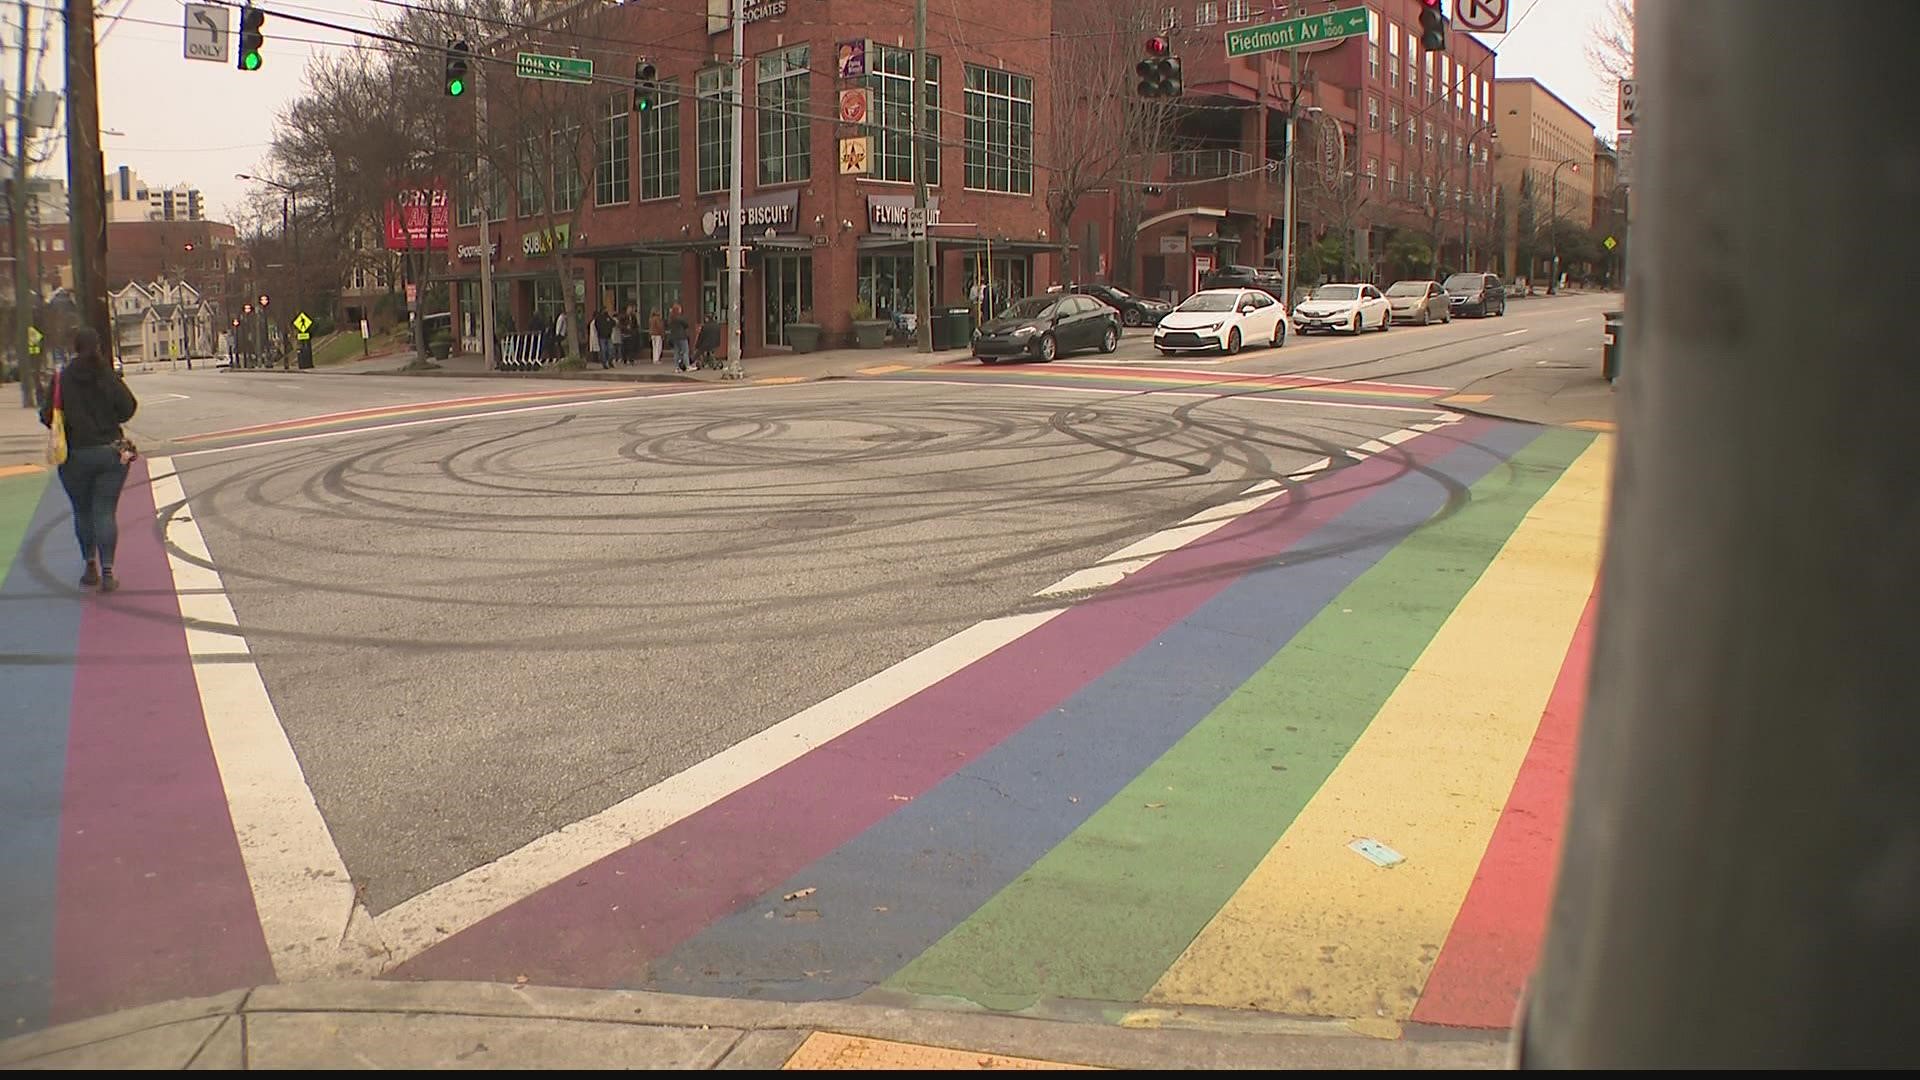 An Atlanta landmark in Midtown was marked up over the weekend, as drivers left skid marks all over the rainbow crosswalk at the intersection of 10th and Piedmont.